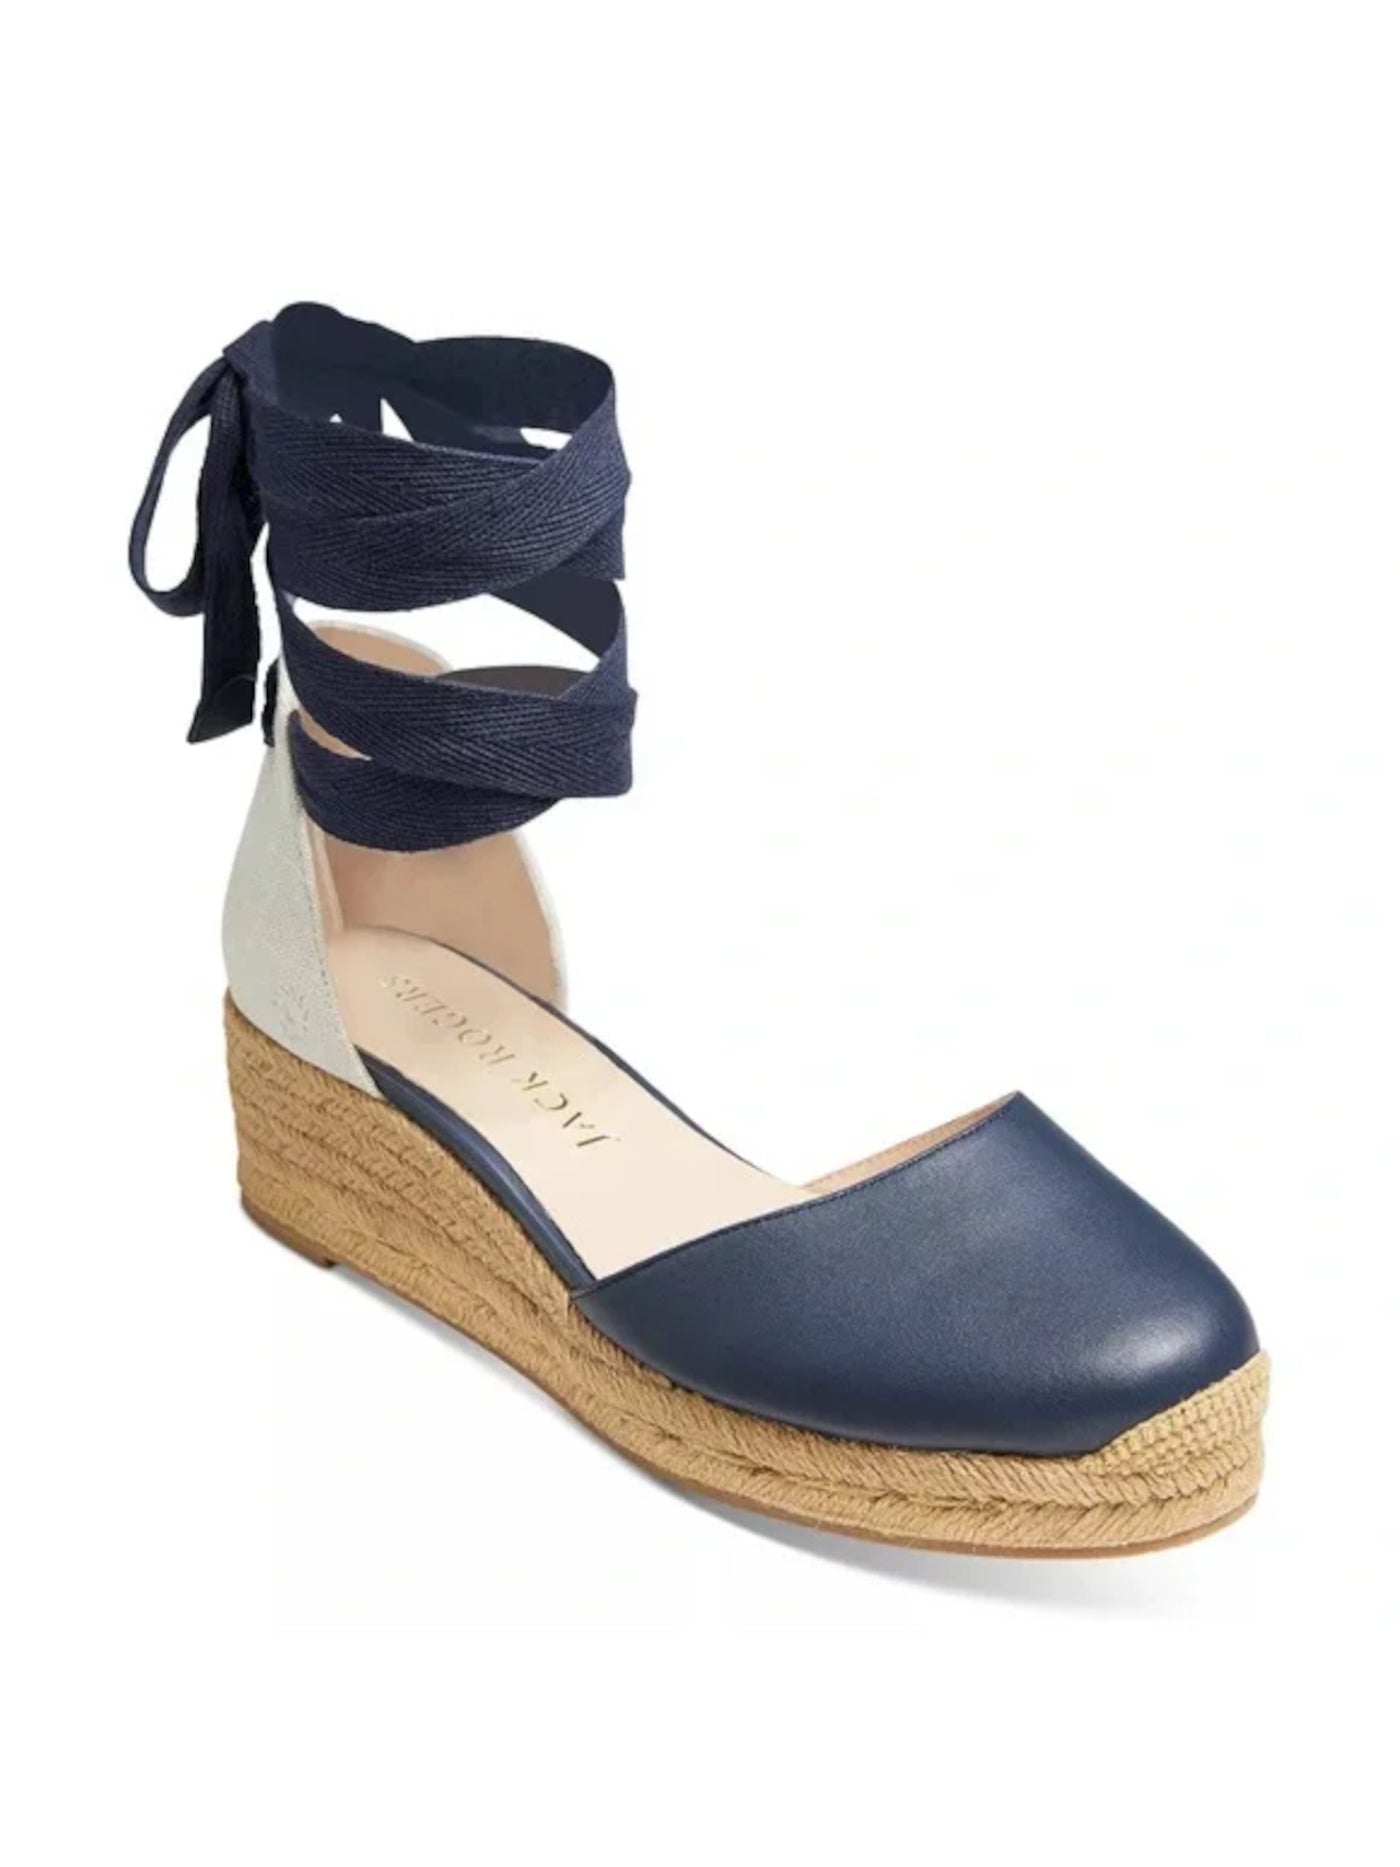 JACK ROGERS Womens Navy Mixed Media 1" Platform Wrapping Ankle Padded Palmer Round Toe Wedge Lace-Up Leather Espadrille Shoes 5.5